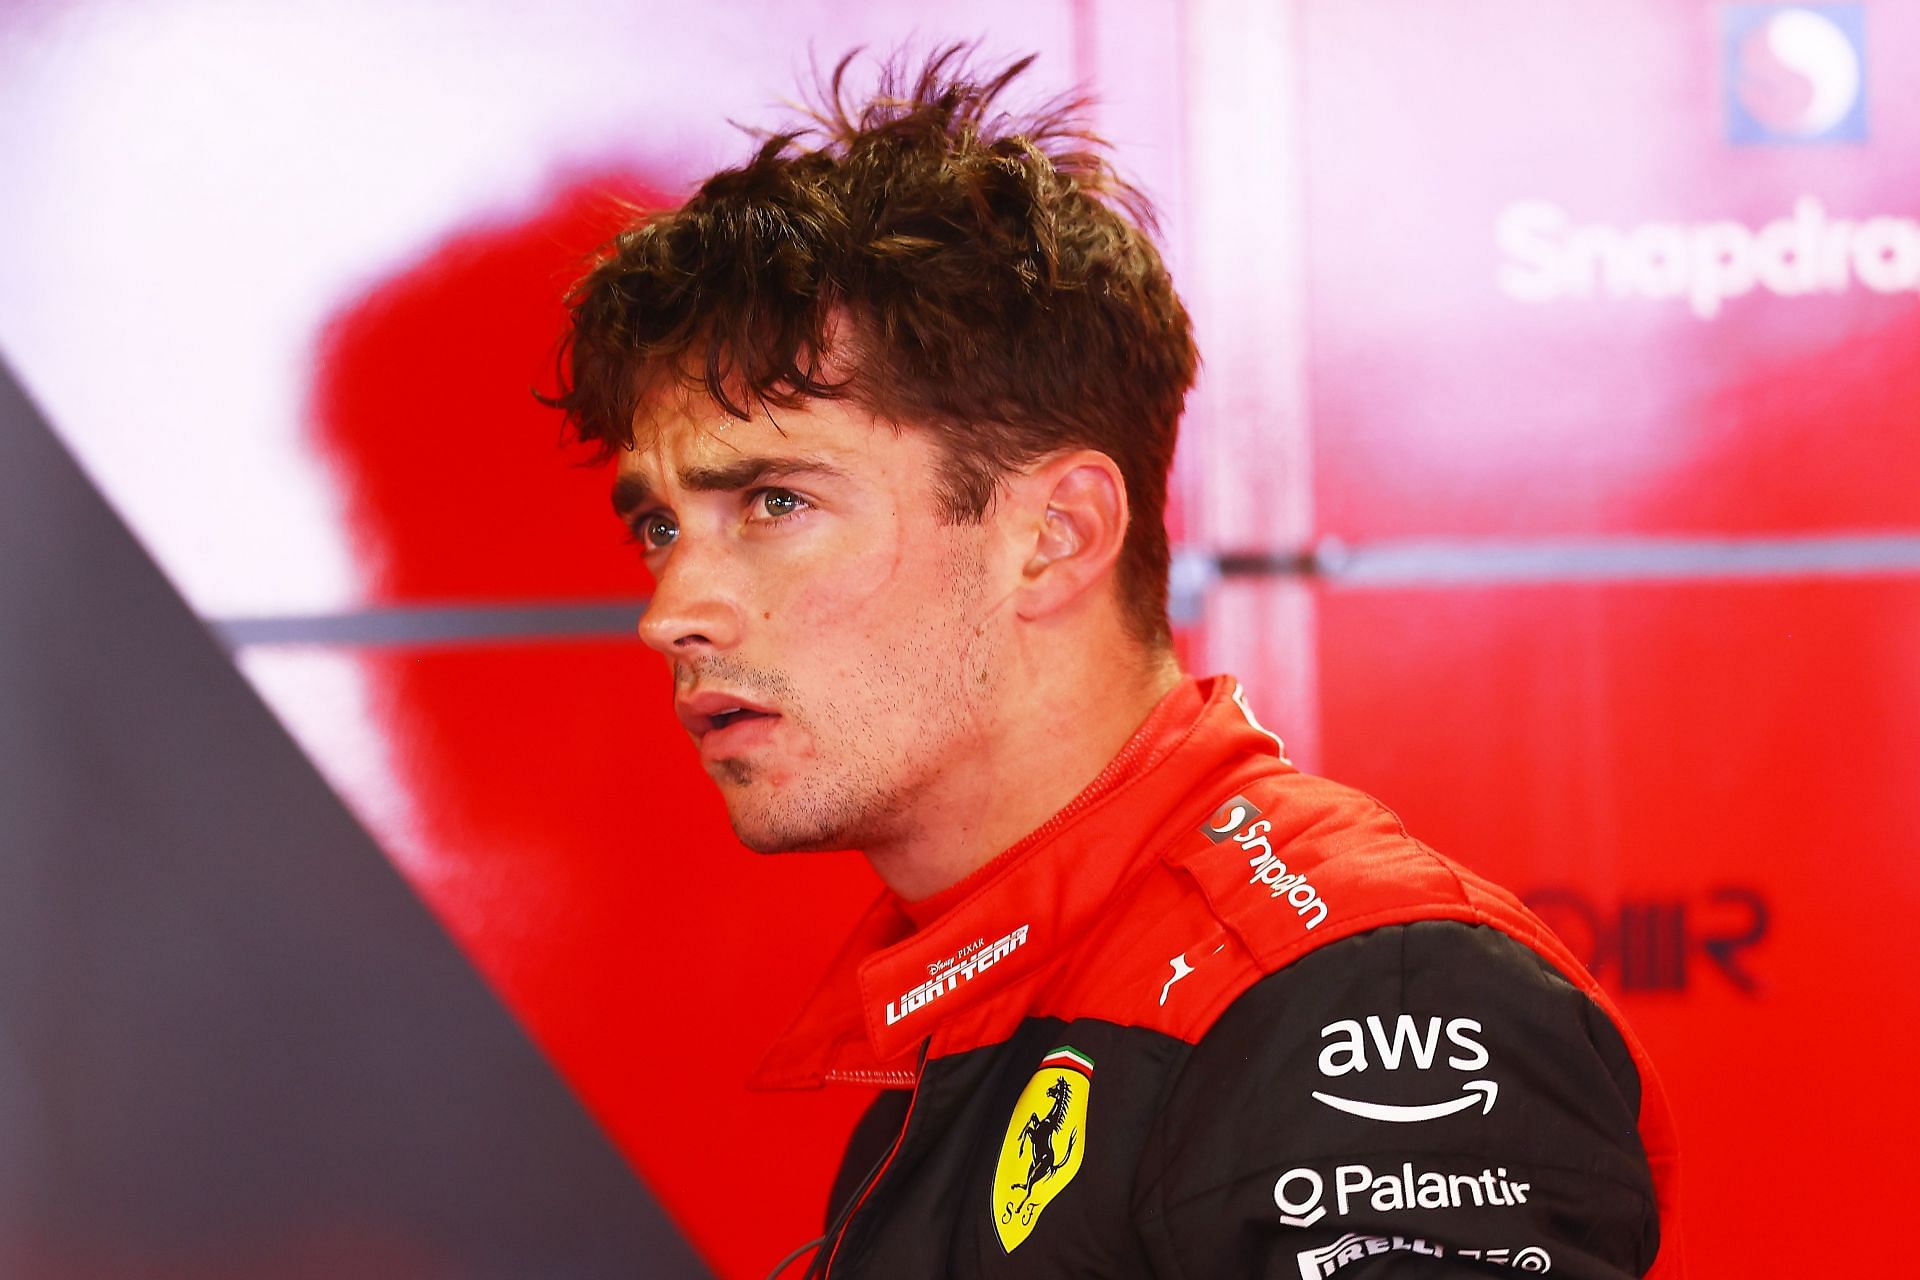 Charles Leclerc has been advised to be &quot;meek&quot; by Ralf Schumacher